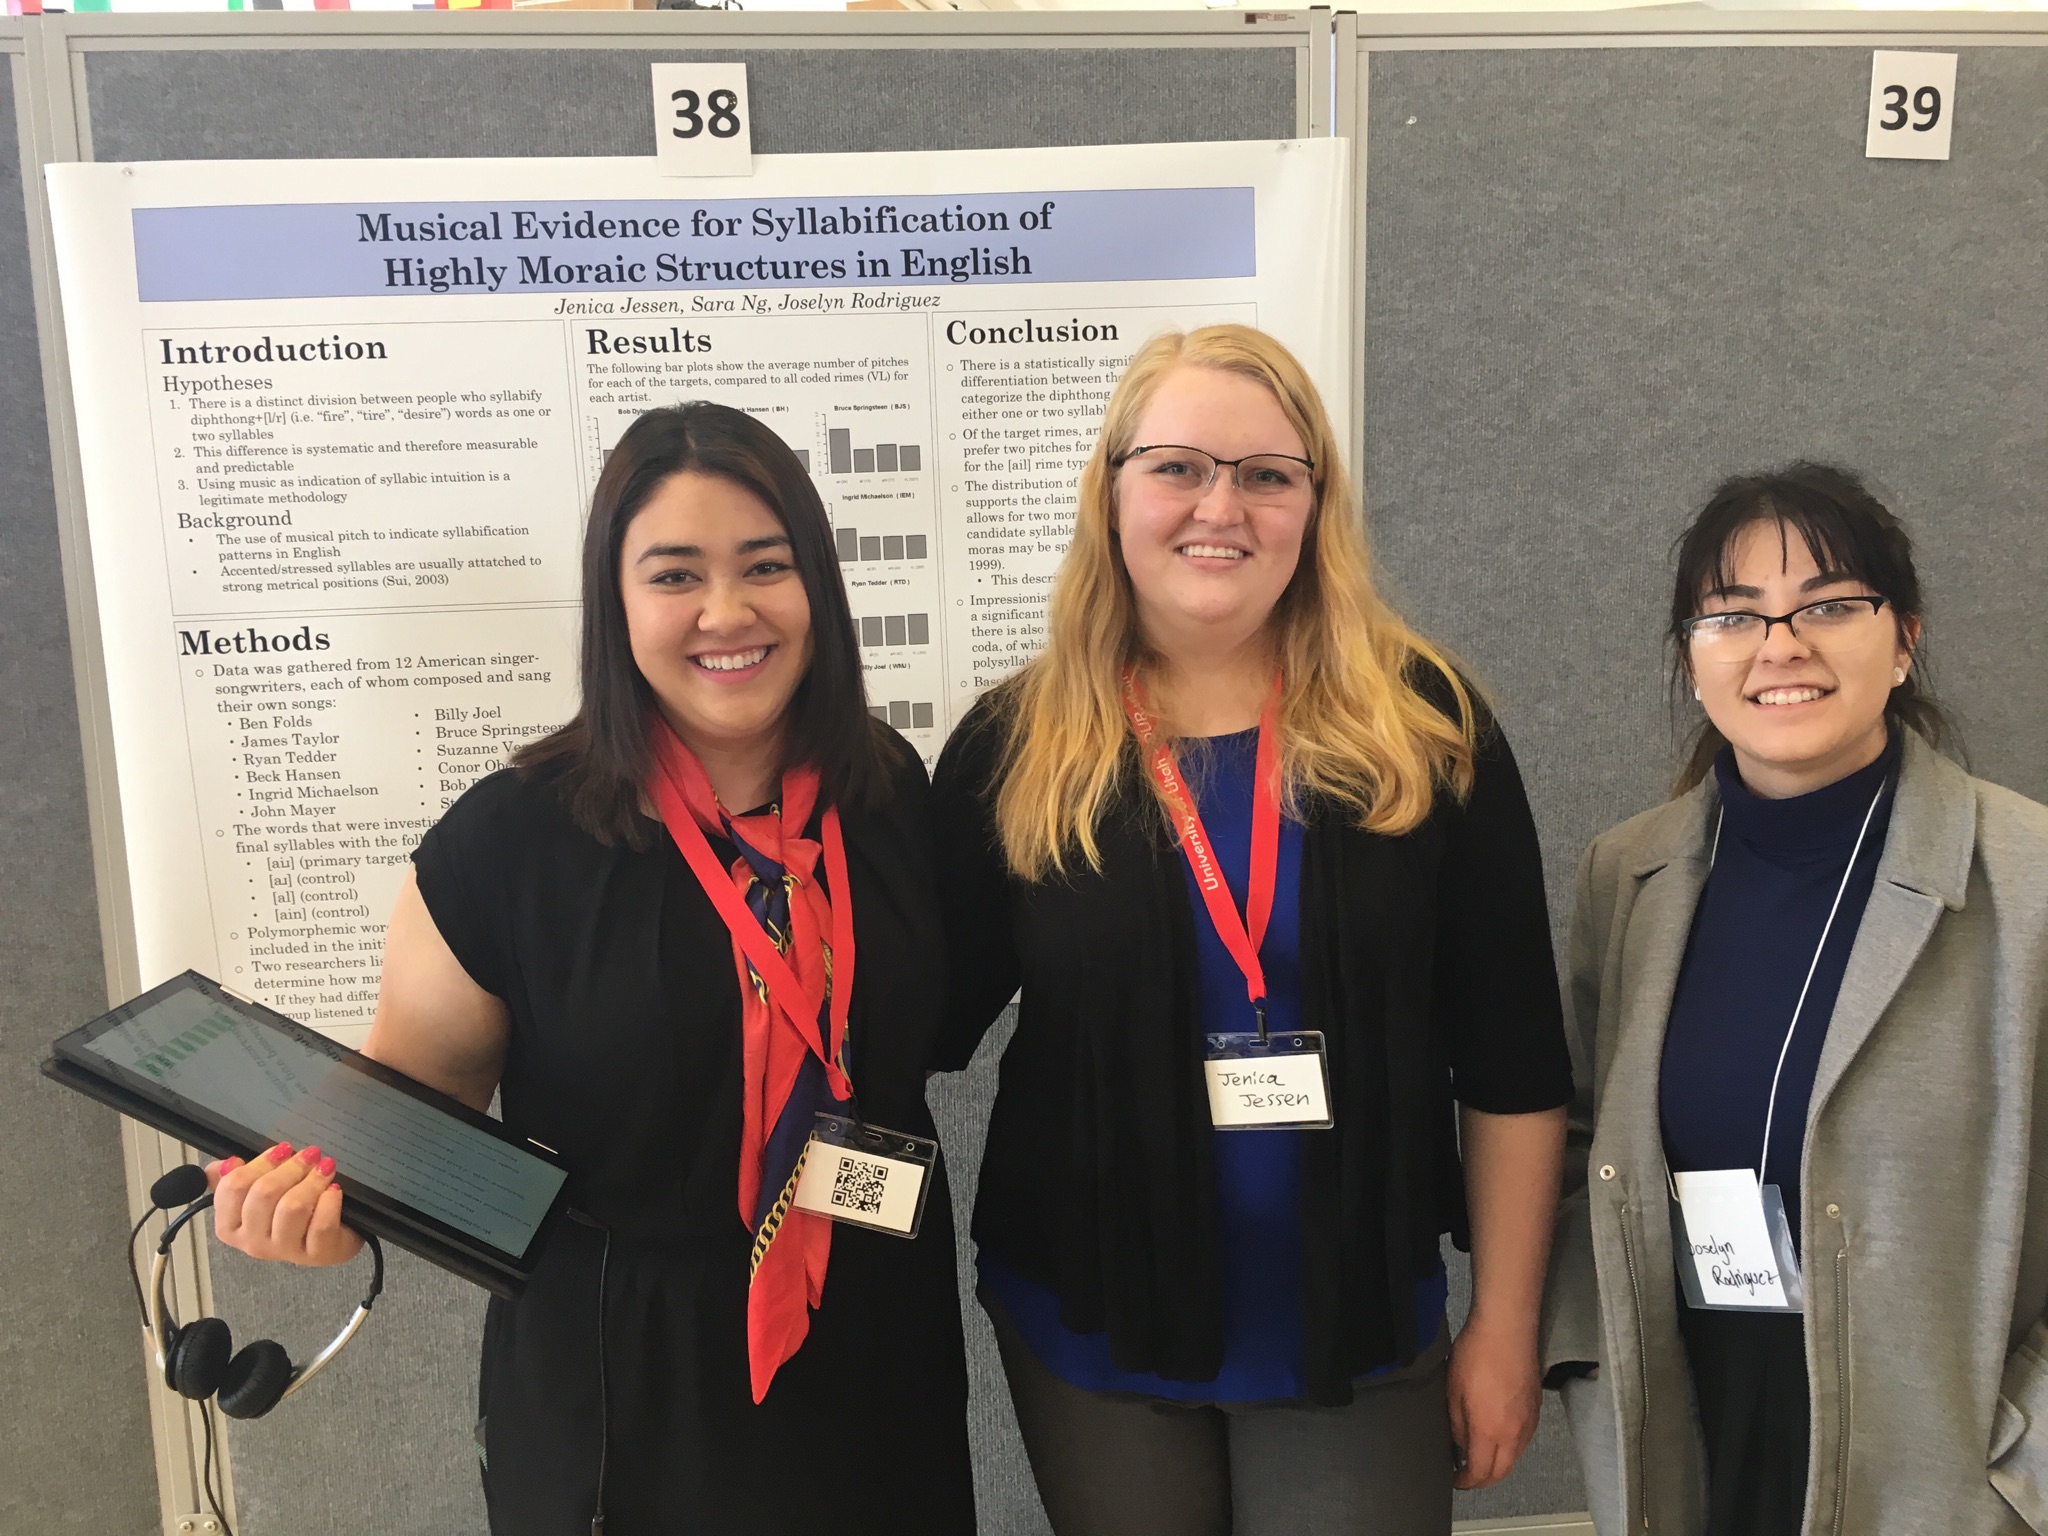 Jenica Jessen, Sara Ng, Joselyn Rodriguez, and Eve Olson presented at the Undergraduate Research Symposium on April 4th.